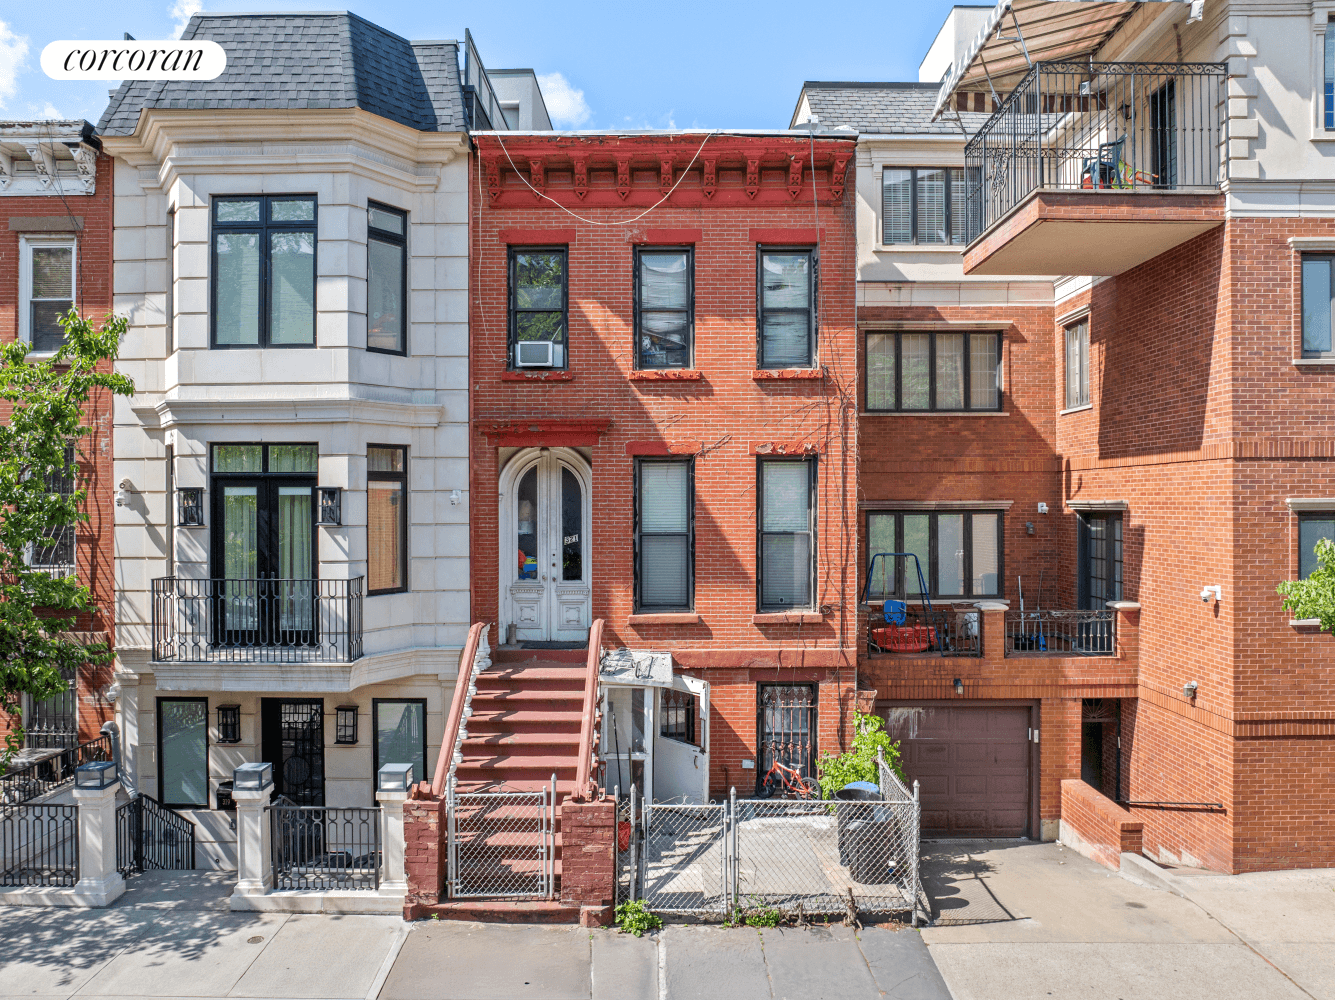 Welcome to 321 Willoughby Avenue, this charming 2 unit townhouse is located in prime Bedford Stuyvesant.